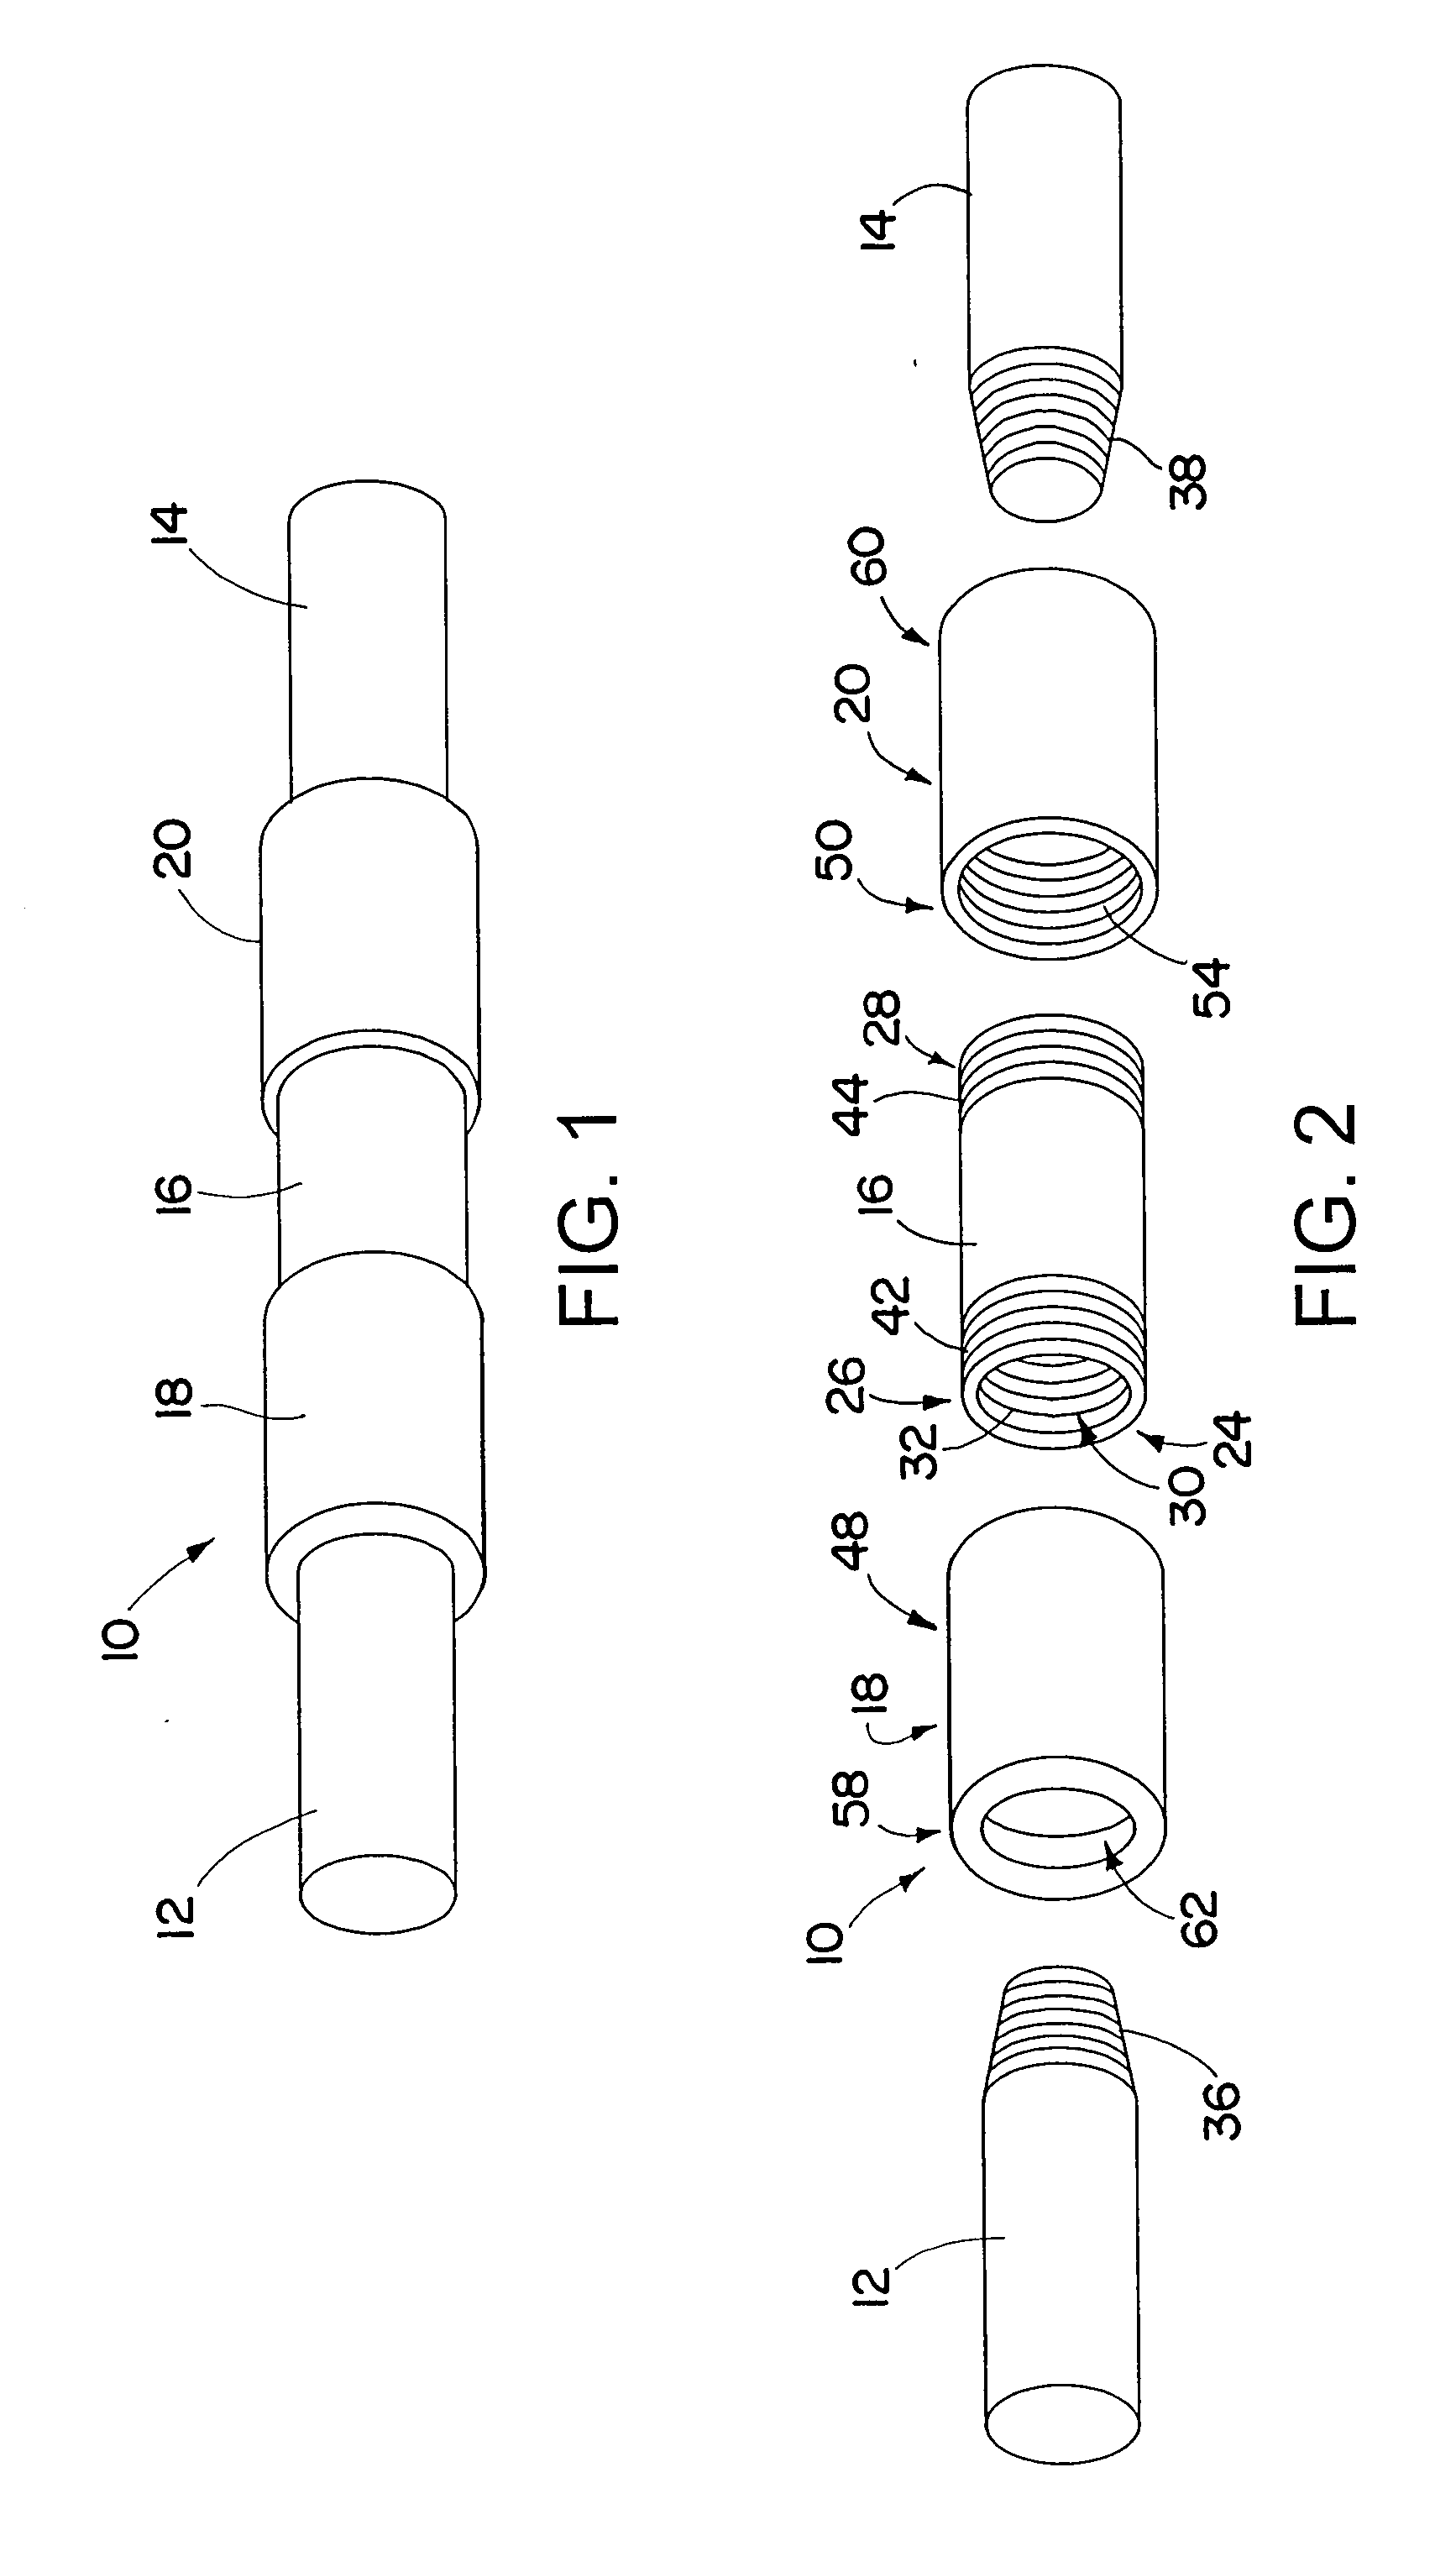 Reinforcing bar splice with threaded collars